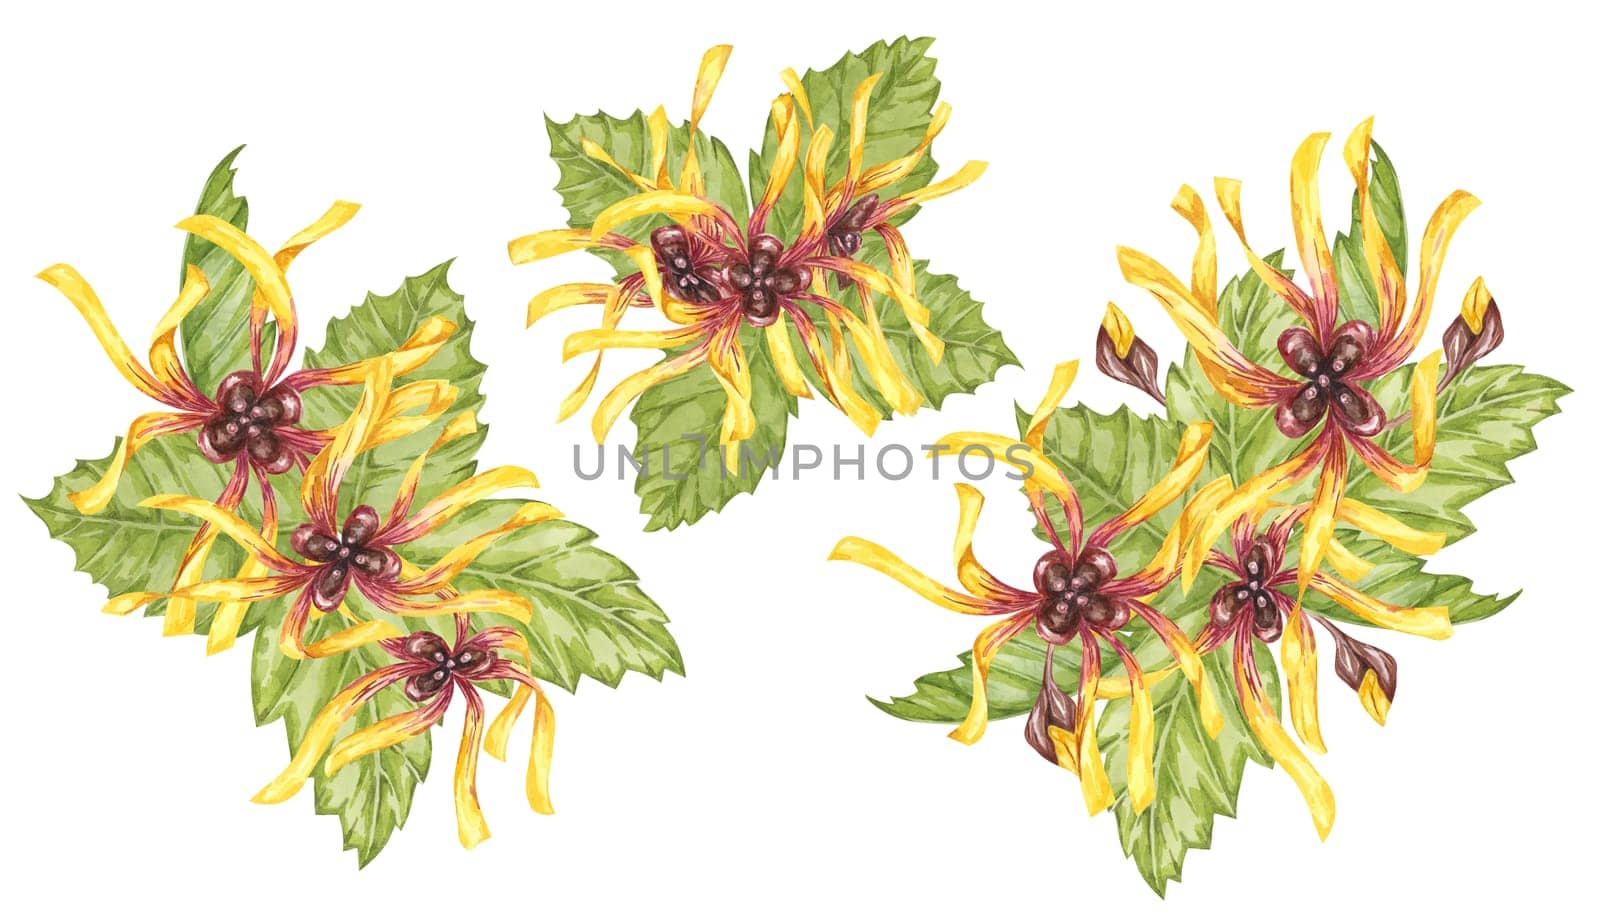 Witch hazel yellow medicinal plant flower and leaves clipart. Hamamelis virginiana in bloom. Watercolor florals for cosmetics, water, herbal medicine, beauty, cream packaging, national day flyer, logo